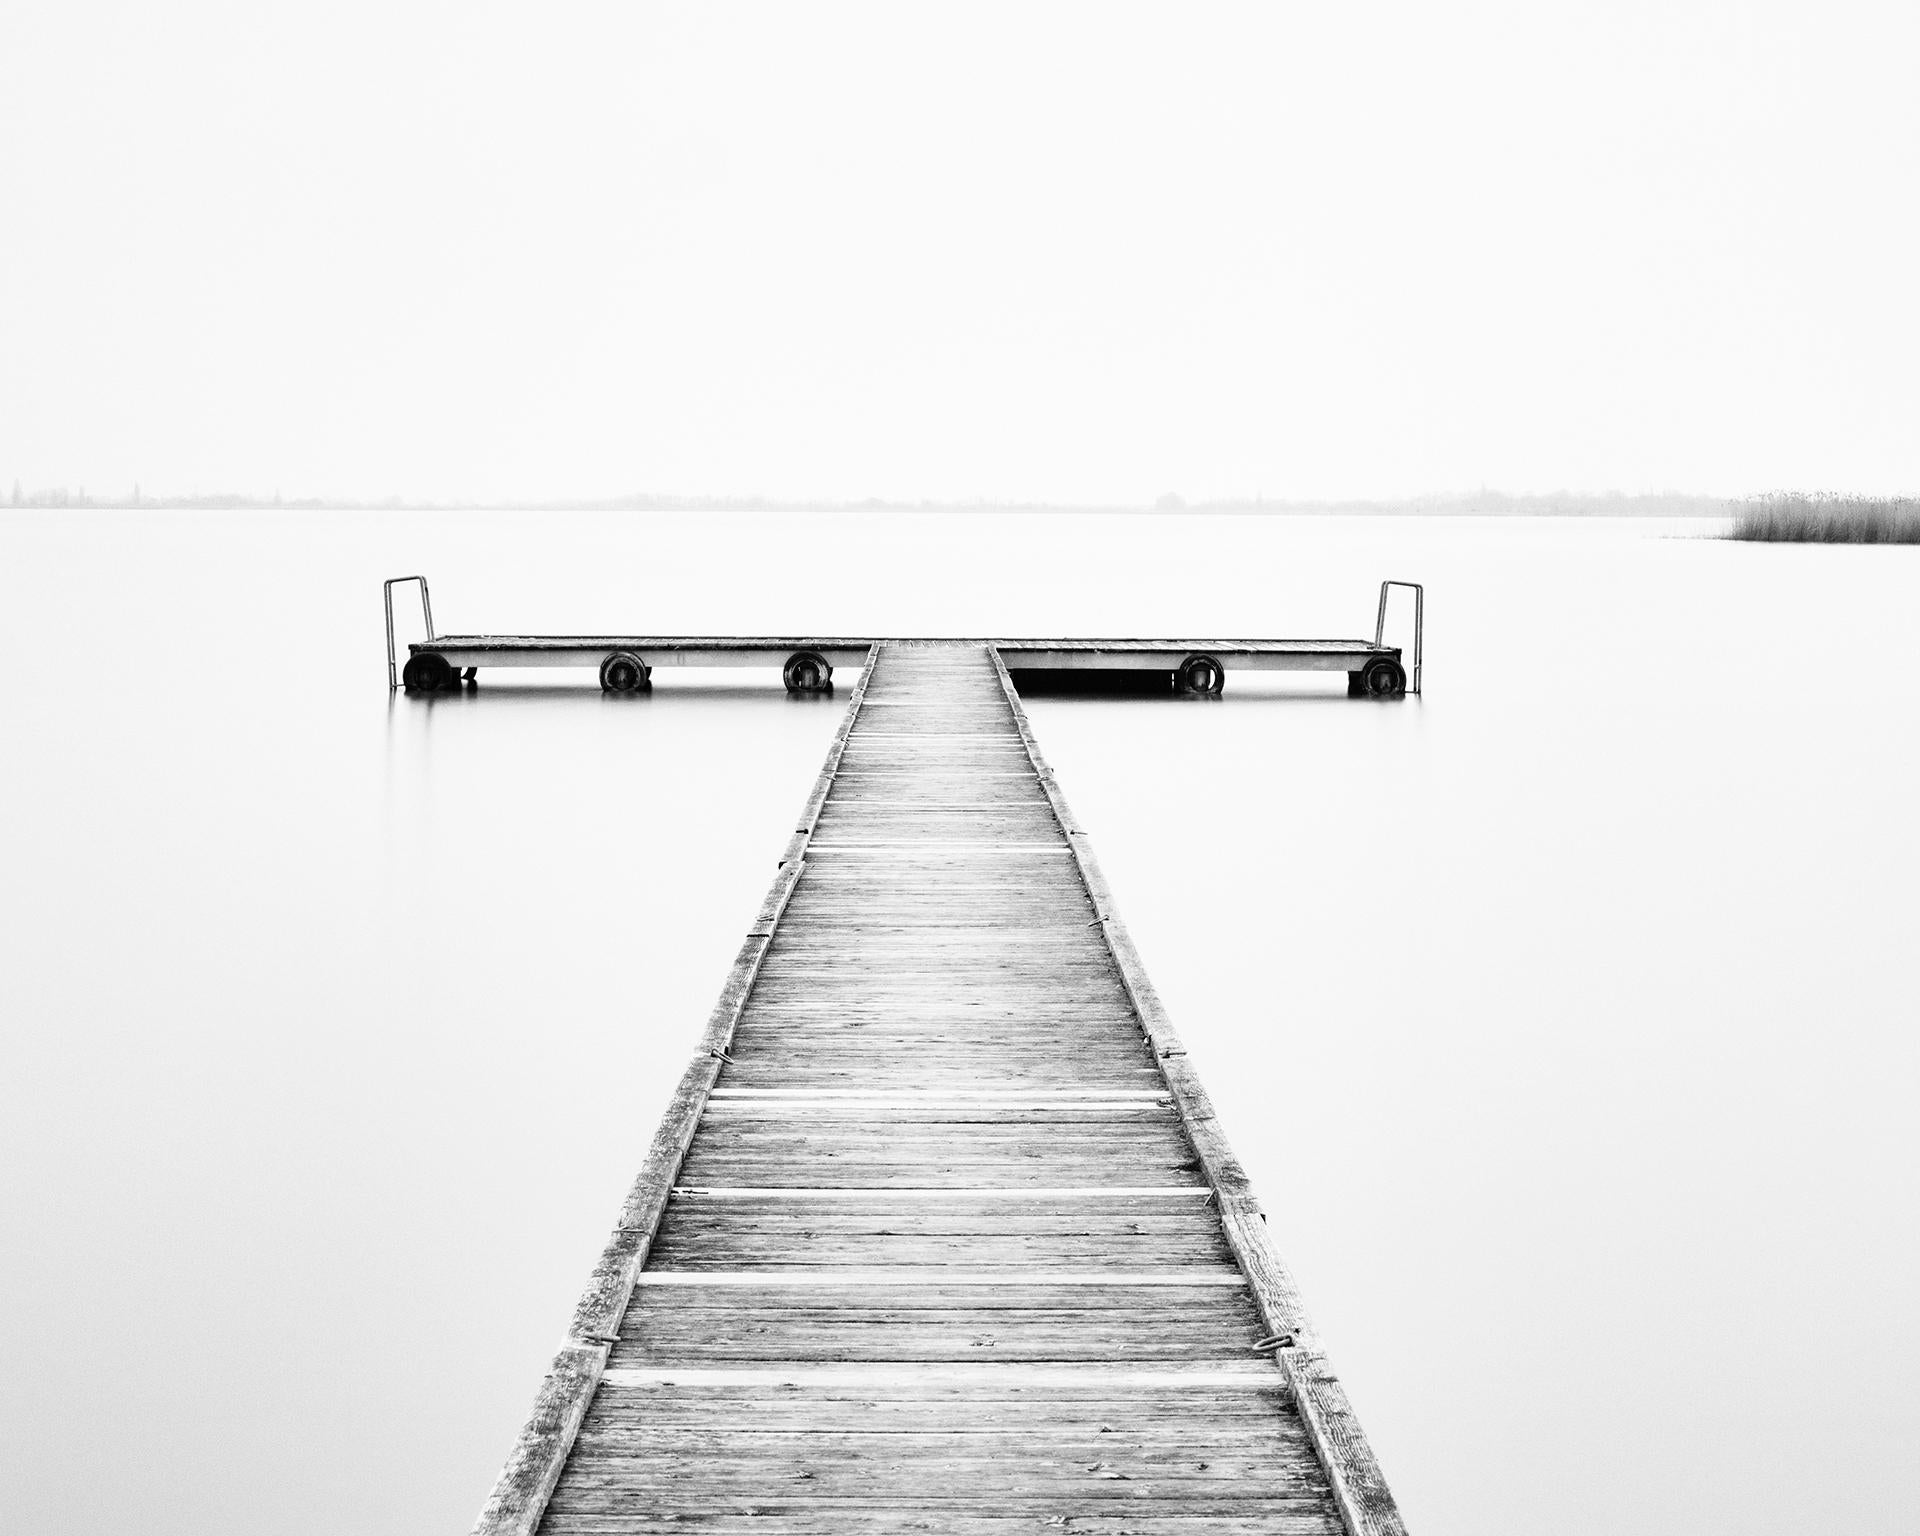 Wood Pier, Austria, contemporary black and white fine art photography landscape - Photograph by Gerald Berghammer, Ina Forstinger